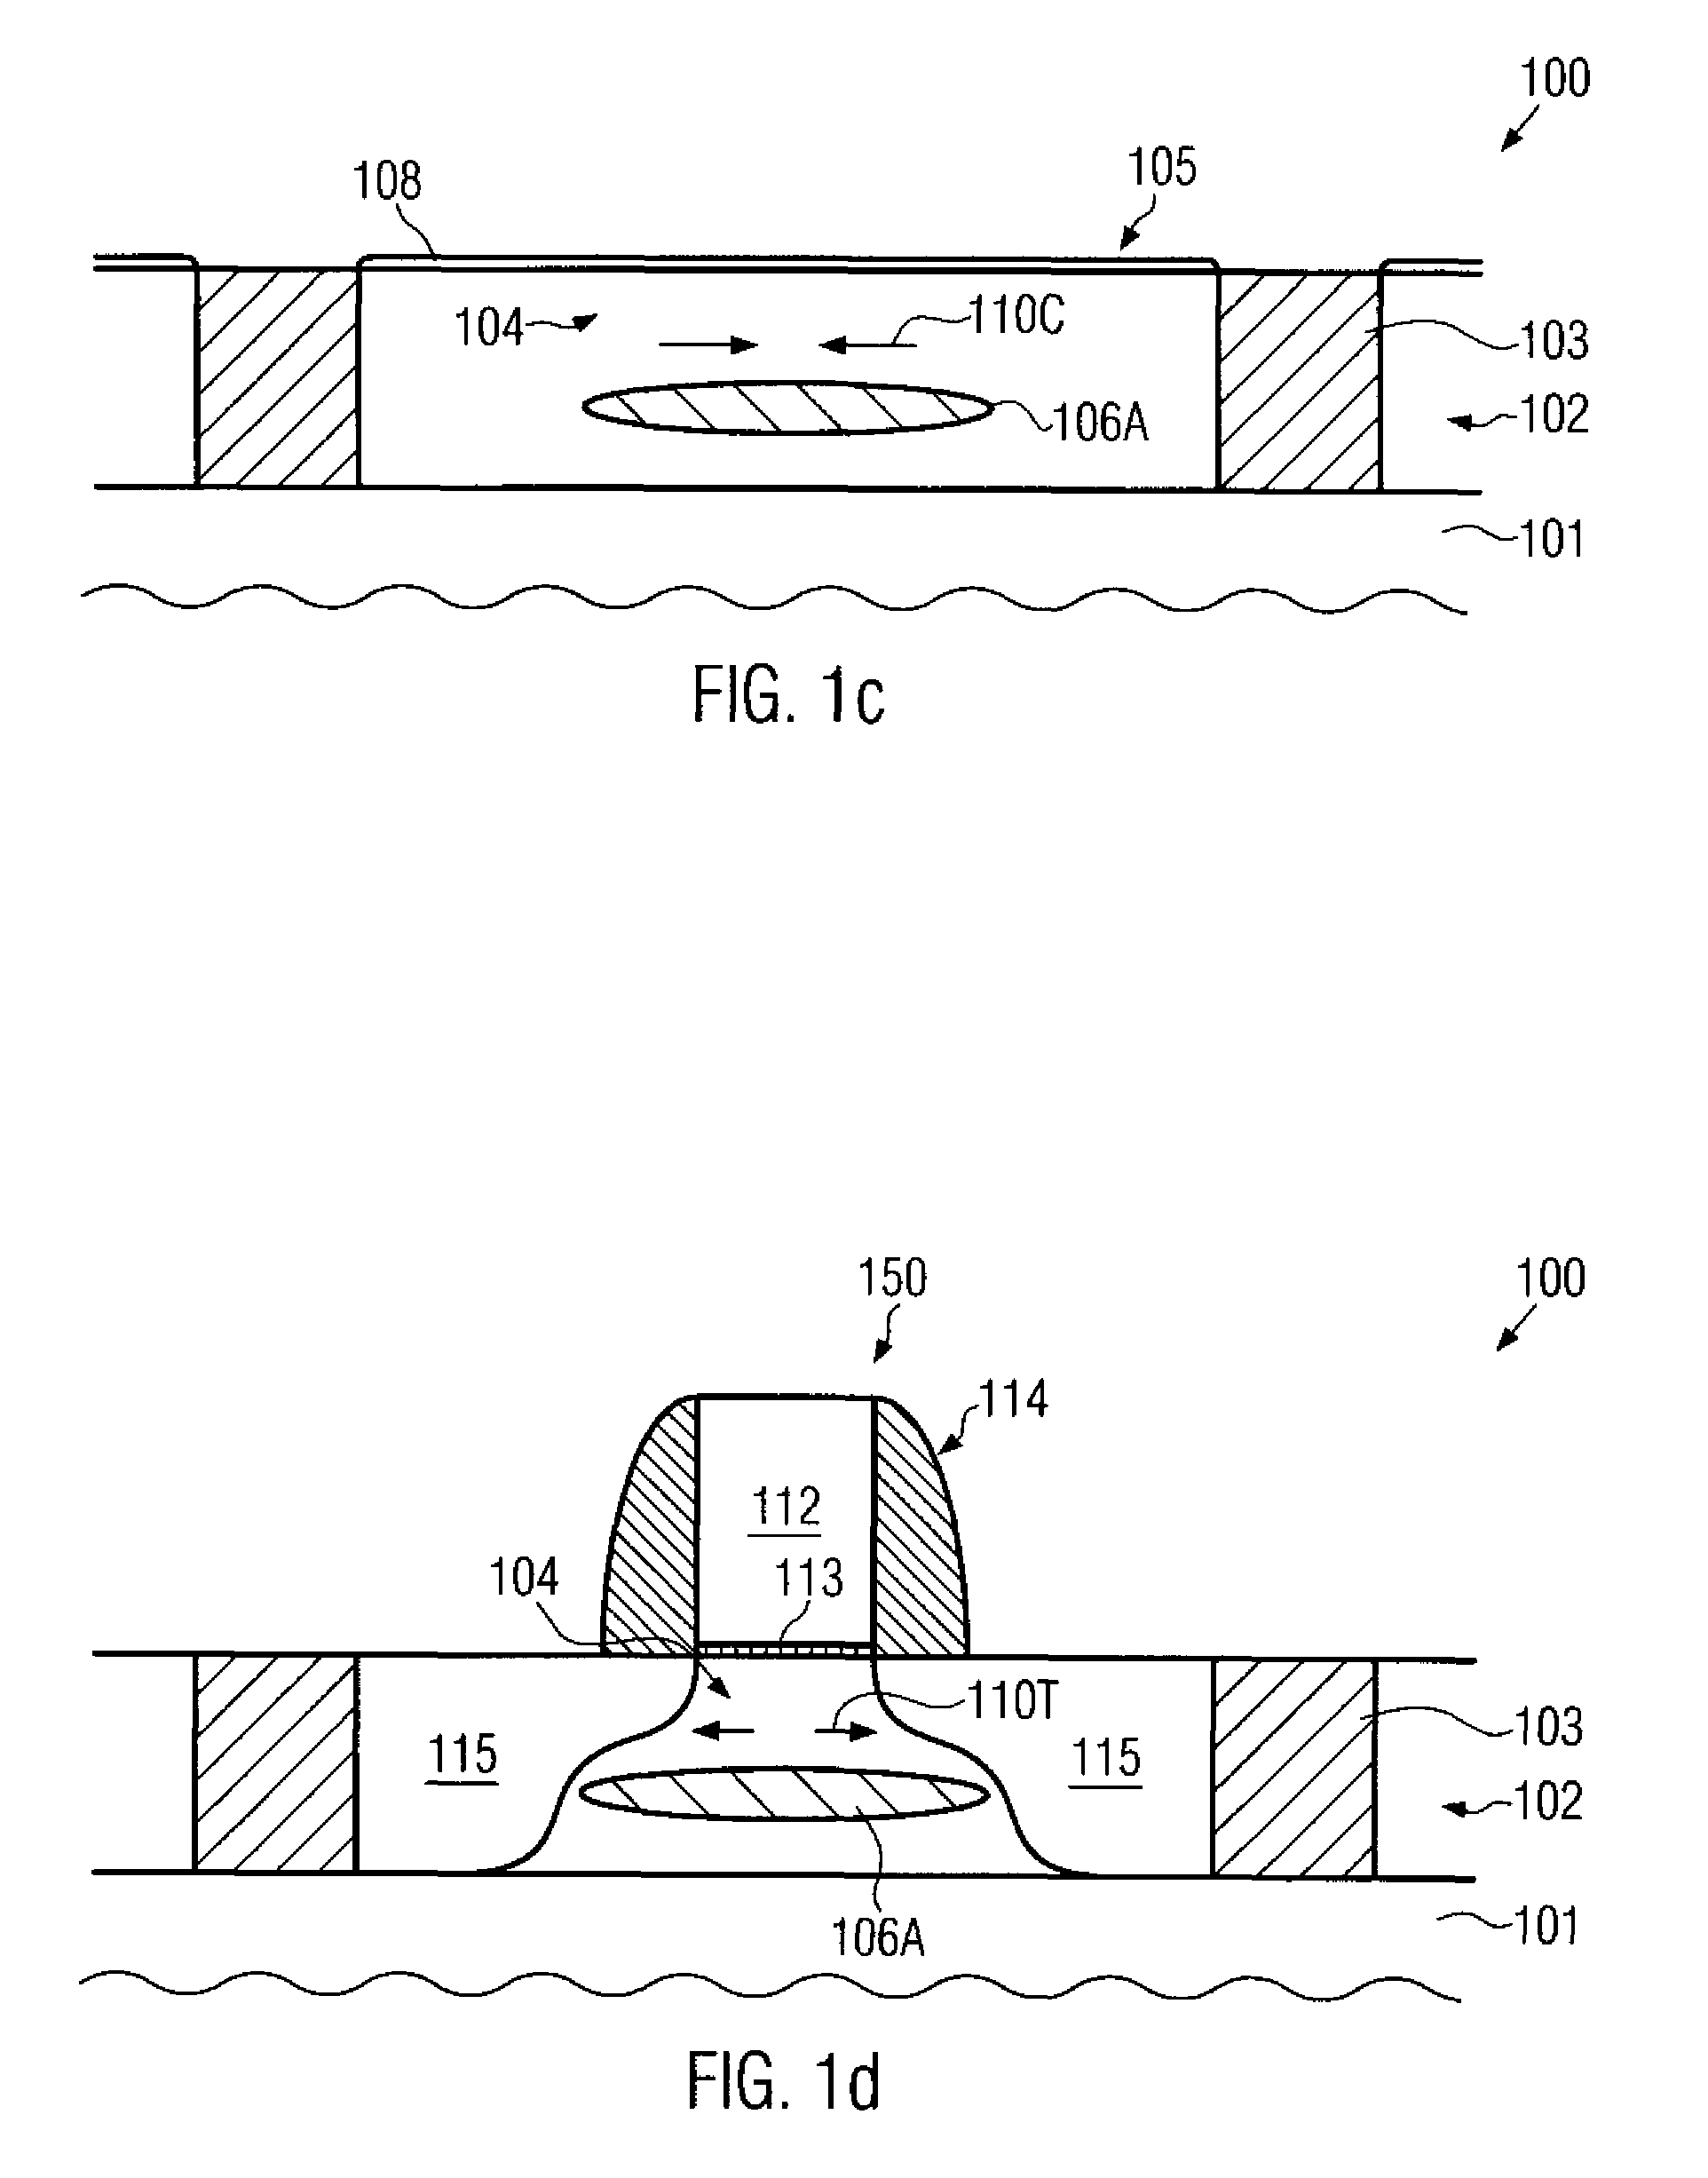 Technique for strain engineering in silicon-based transistors by using implantation techniques for forming a strain-inducing layer under the channel region